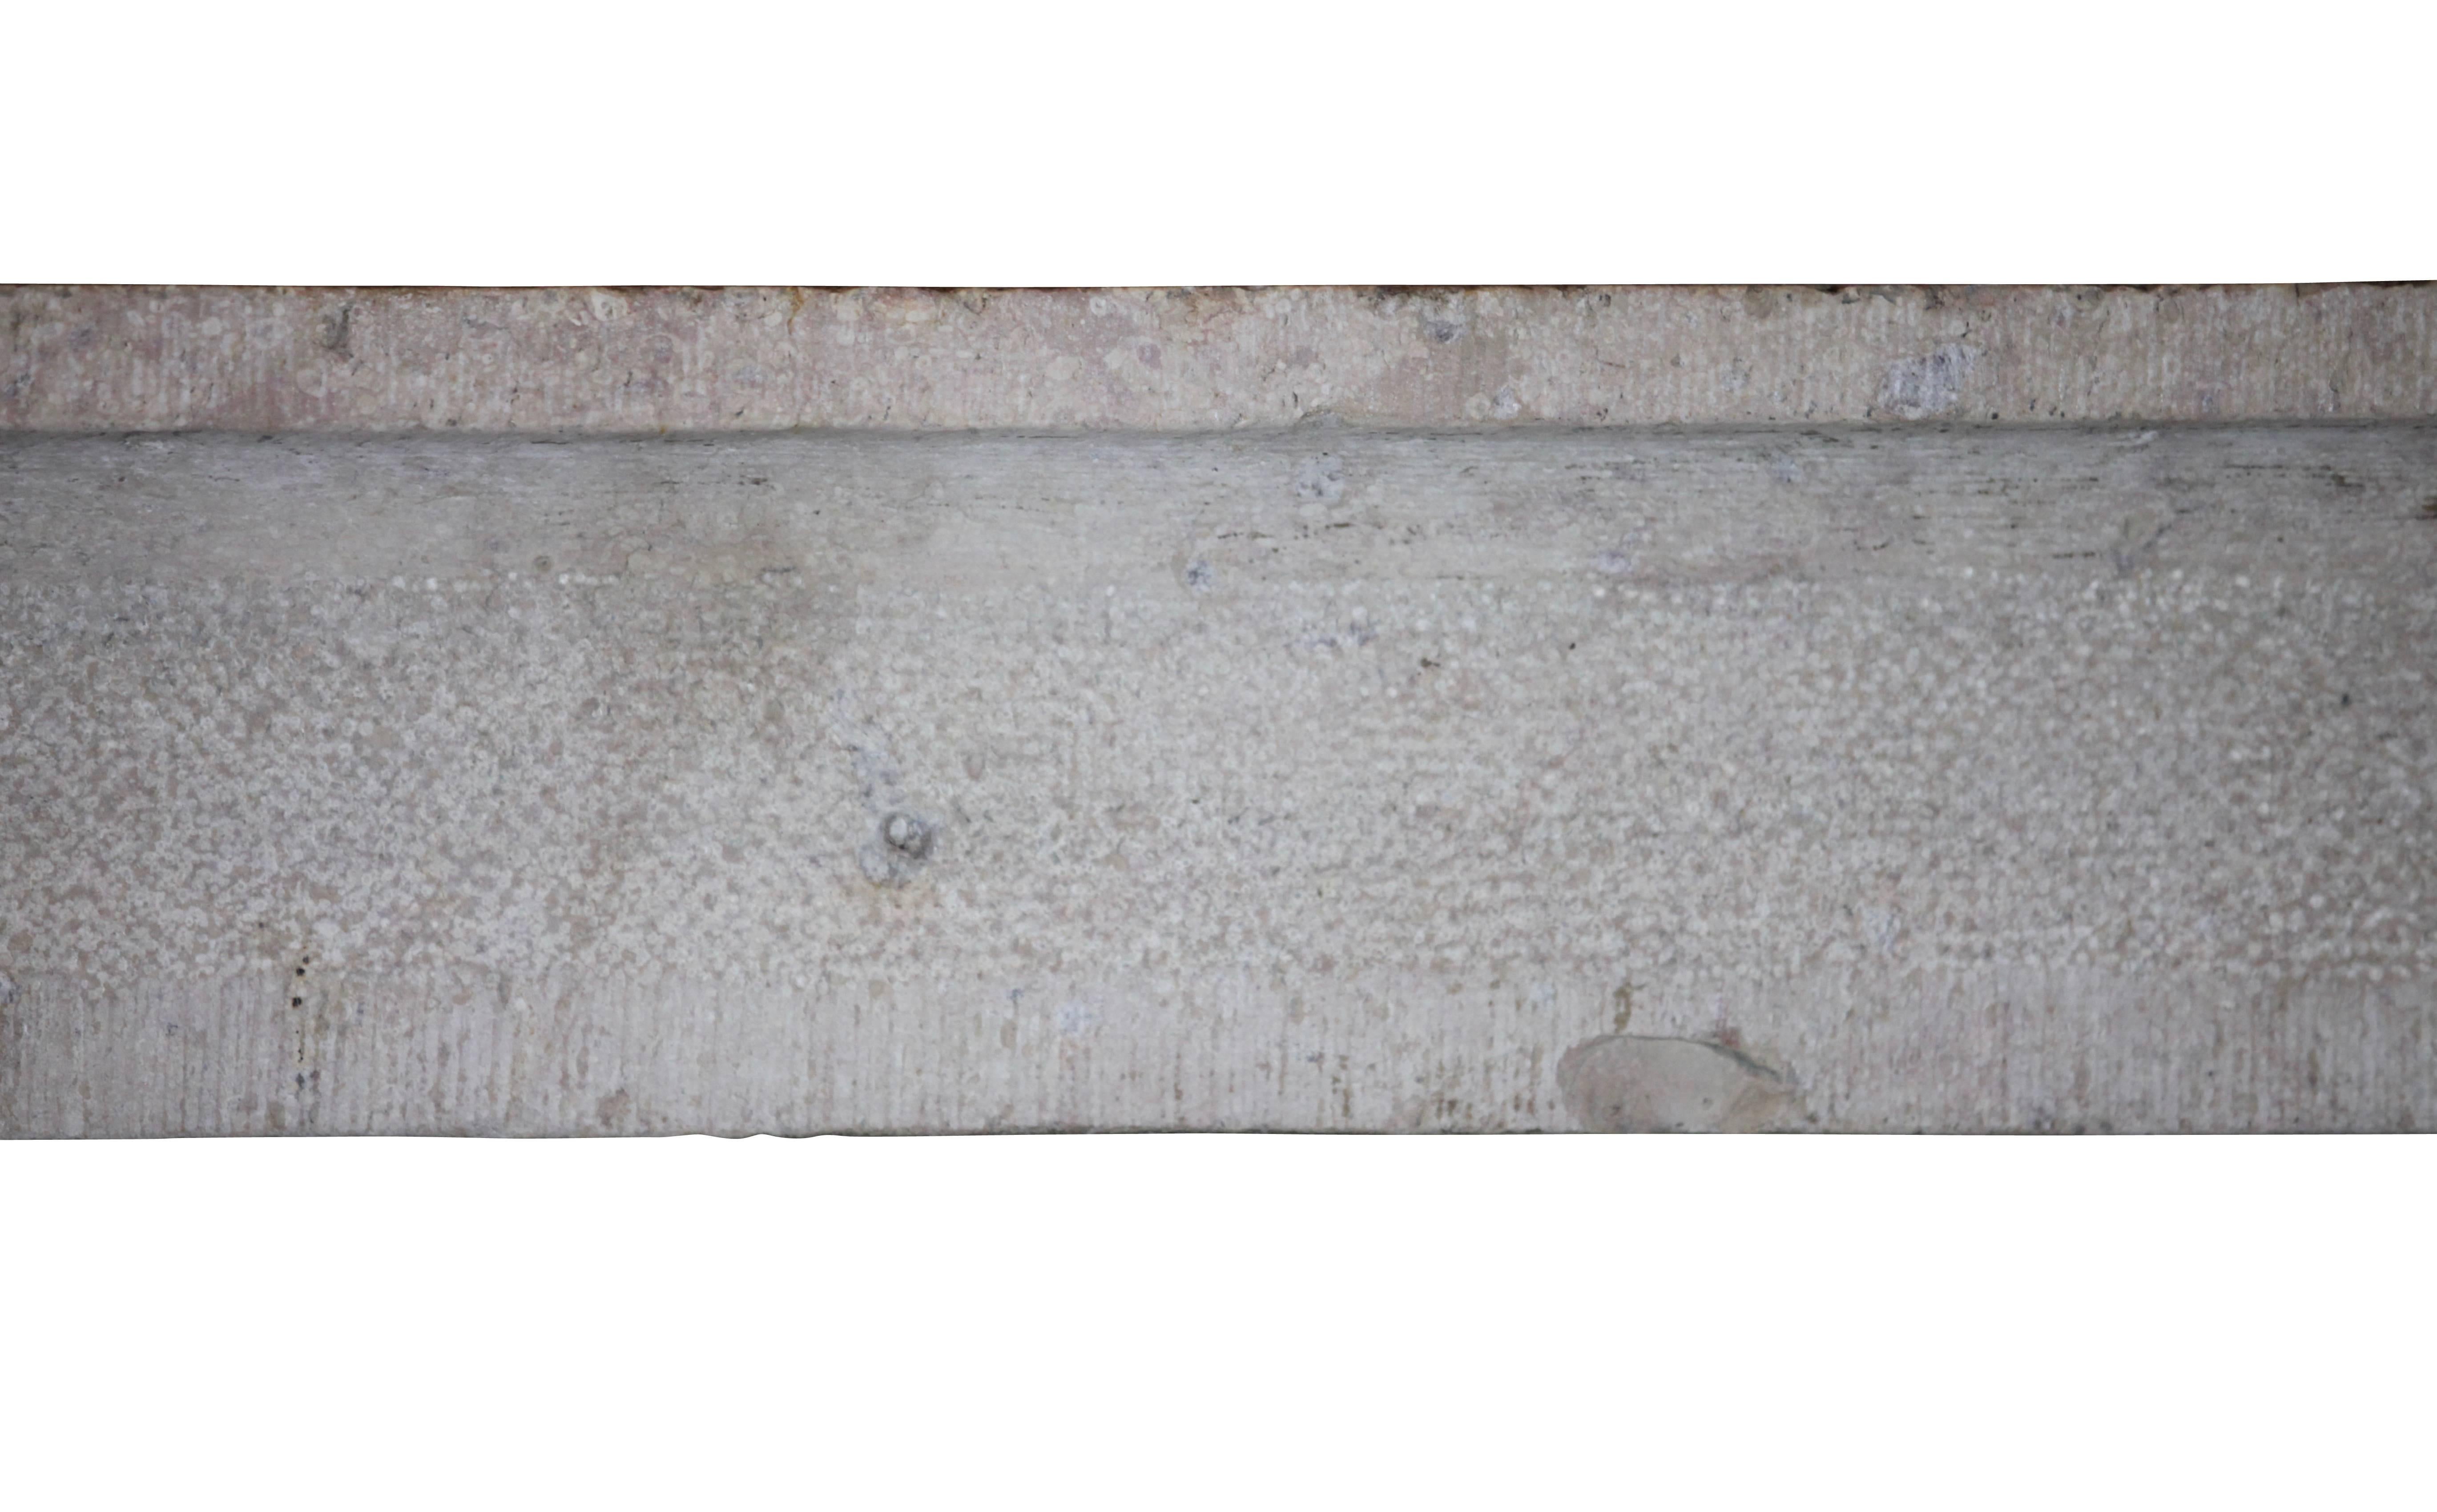 High country and rustic marble stone fireplace surround from the burgundy region. A limestone teint.

Measures:
157 cm EW 61,81",
137 cm EH 53,93",
131 cm IW 51,57",
123 cm IH 48,42",
28 cm S 11,02",
58 cm L